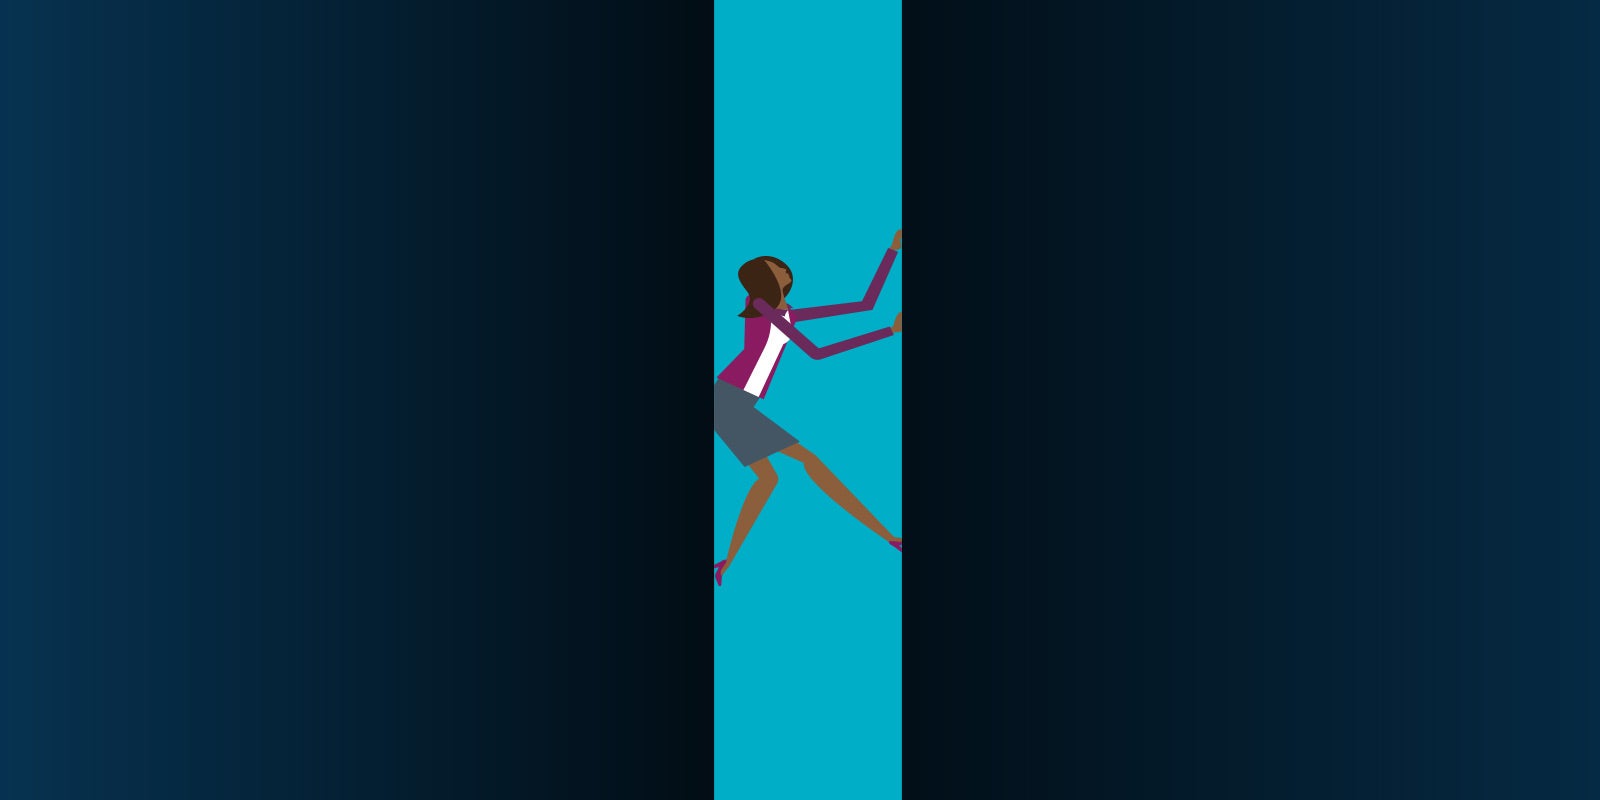 illustration of woman business leader trying to push her way out of a gap that she is in to show that this blog is about the looming leadership skills gap shown in DDI's latest research